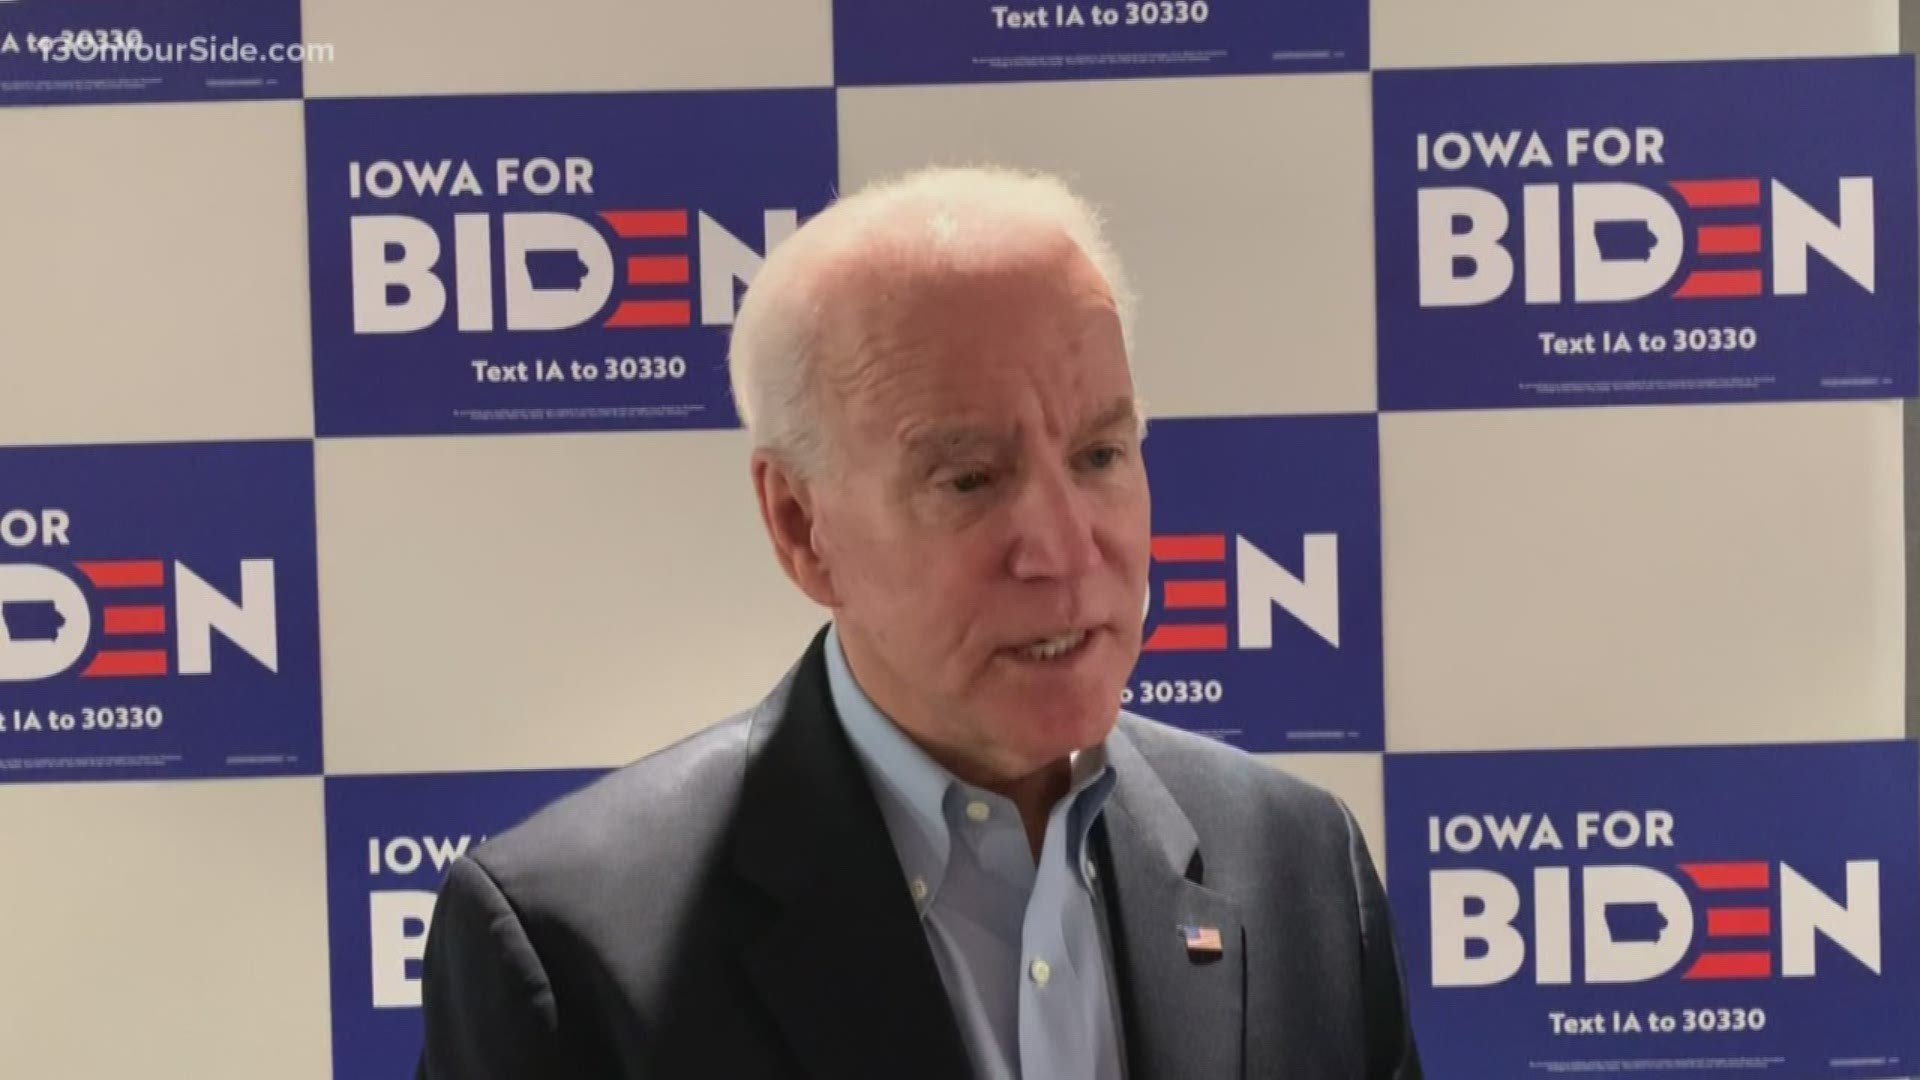 13 ON YOUR SIDE talked to former Vice President and Democratic Presidential candidate Joe Biden in Iowa for the caucus.